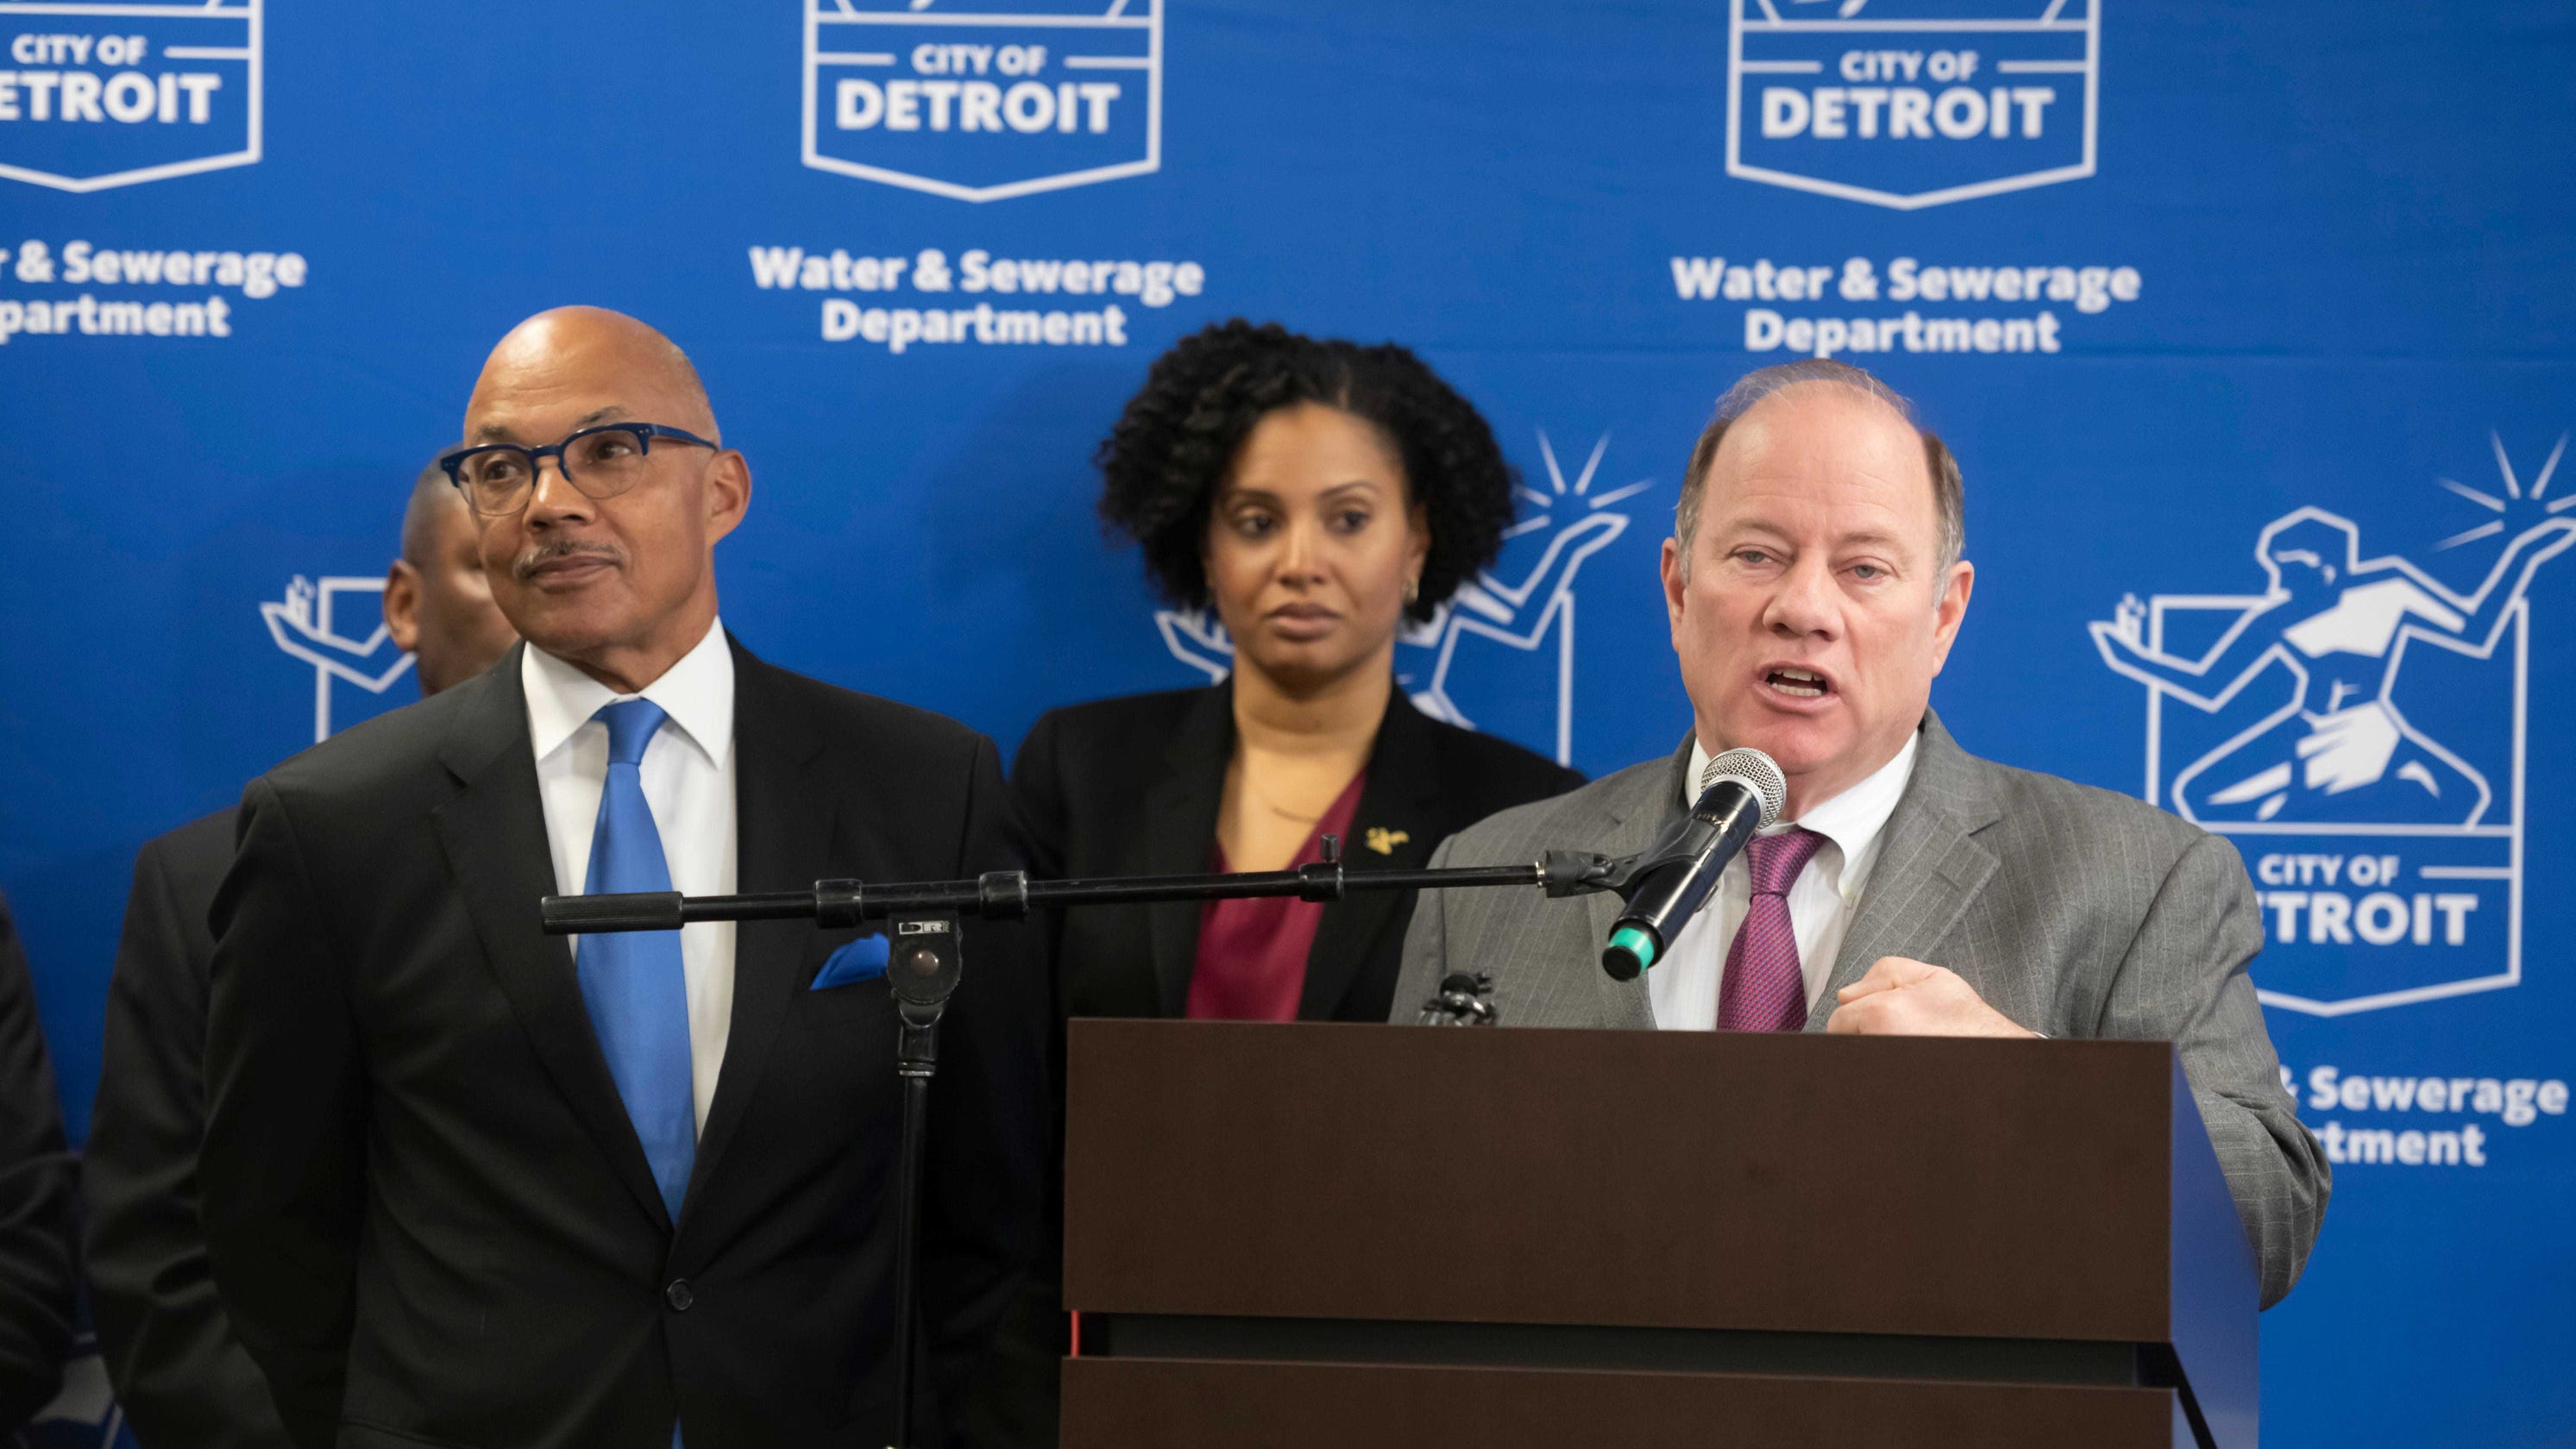 Lawsuit targets state, Detroit over 'unconstitutional' water shutoffs - The Detroit News